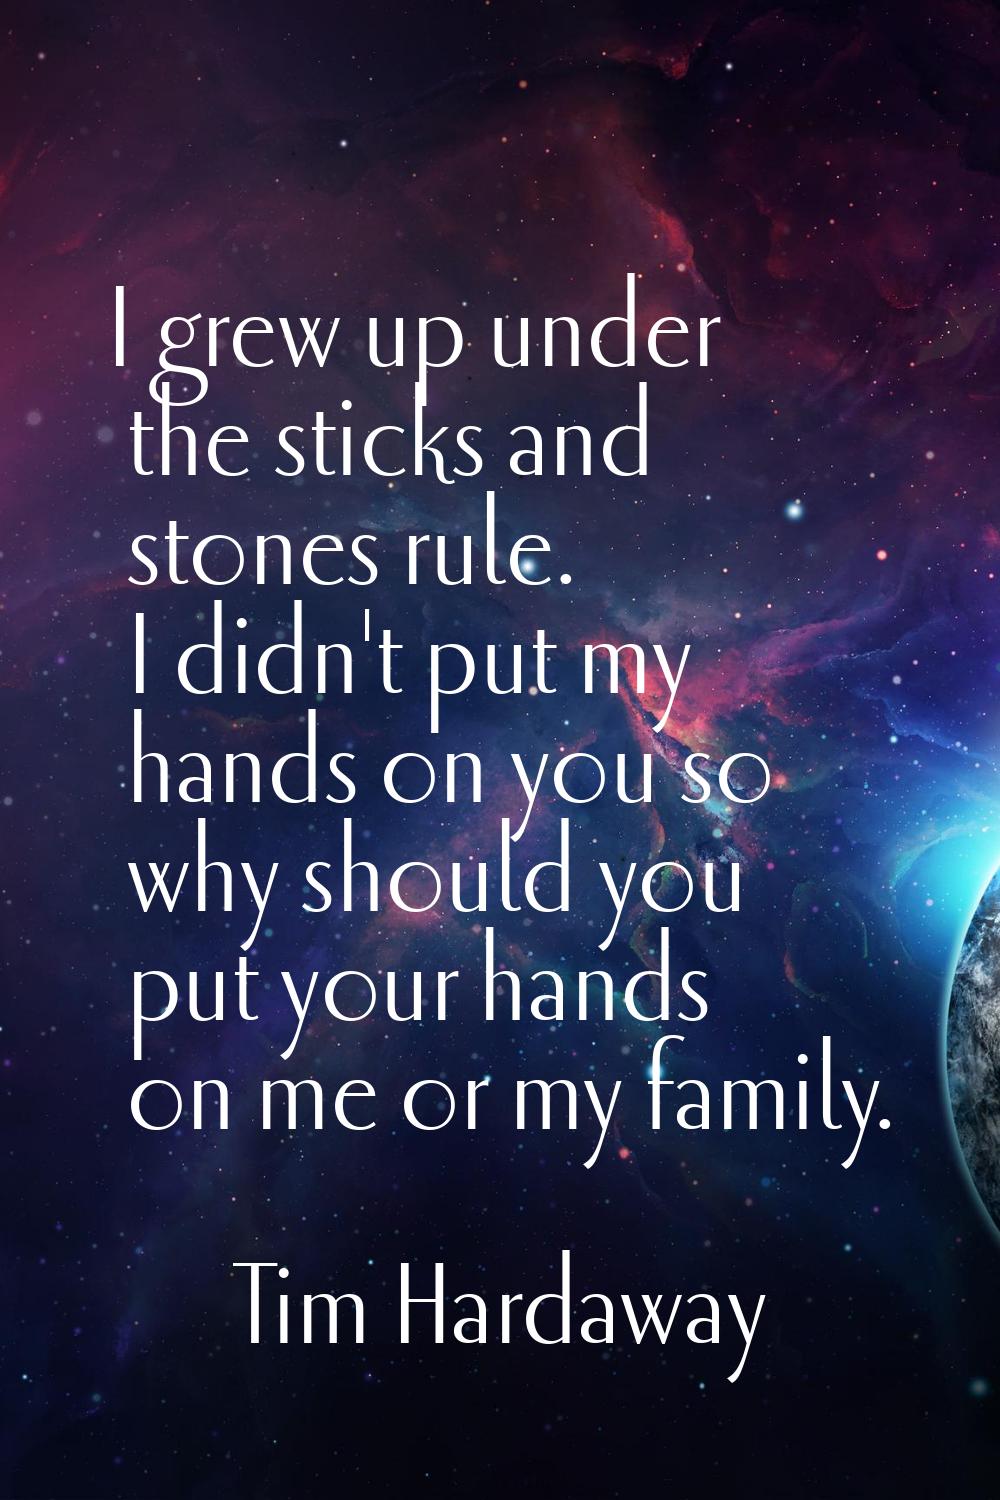 I grew up under the sticks and stones rule. I didn't put my hands on you so why should you put your